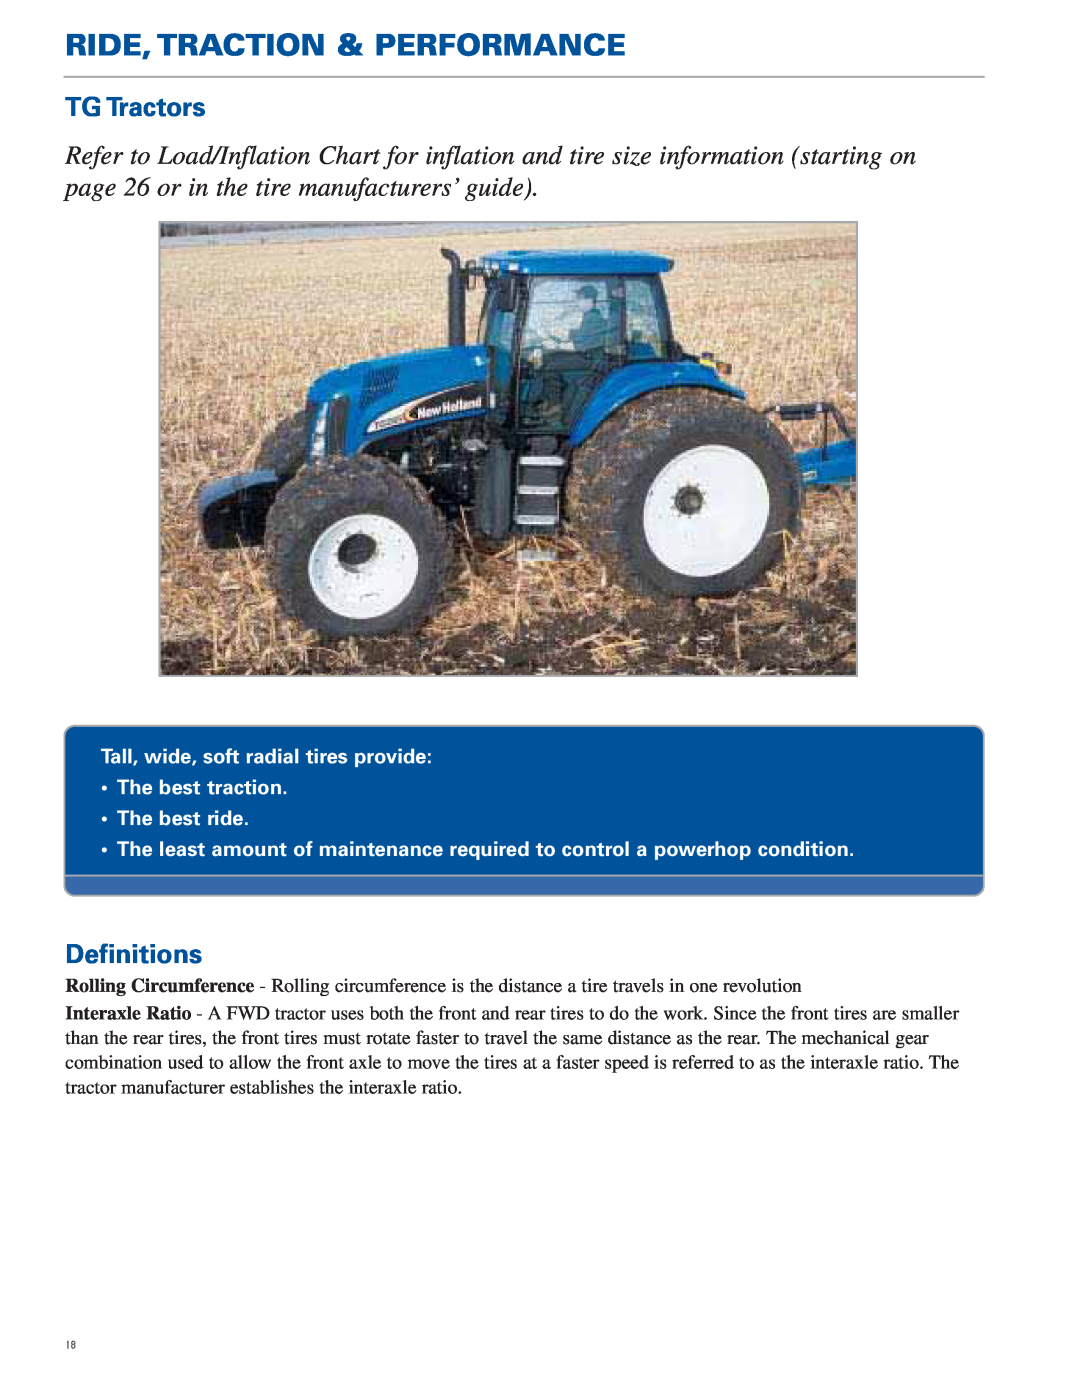 New Holland TJ Series, TG Series manual TG Tractors, Definitions, Ride, Traction & Performance 